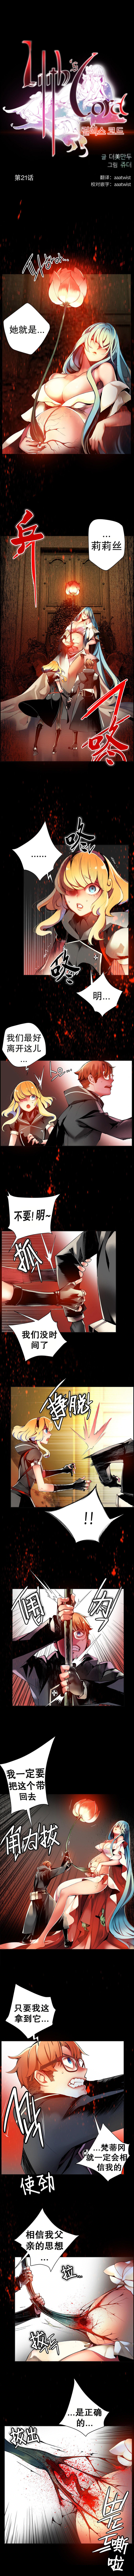 [Juder] 莉莉丝的脐带(Lilith`s Cord) Ch.1-25 [Chinese] 383